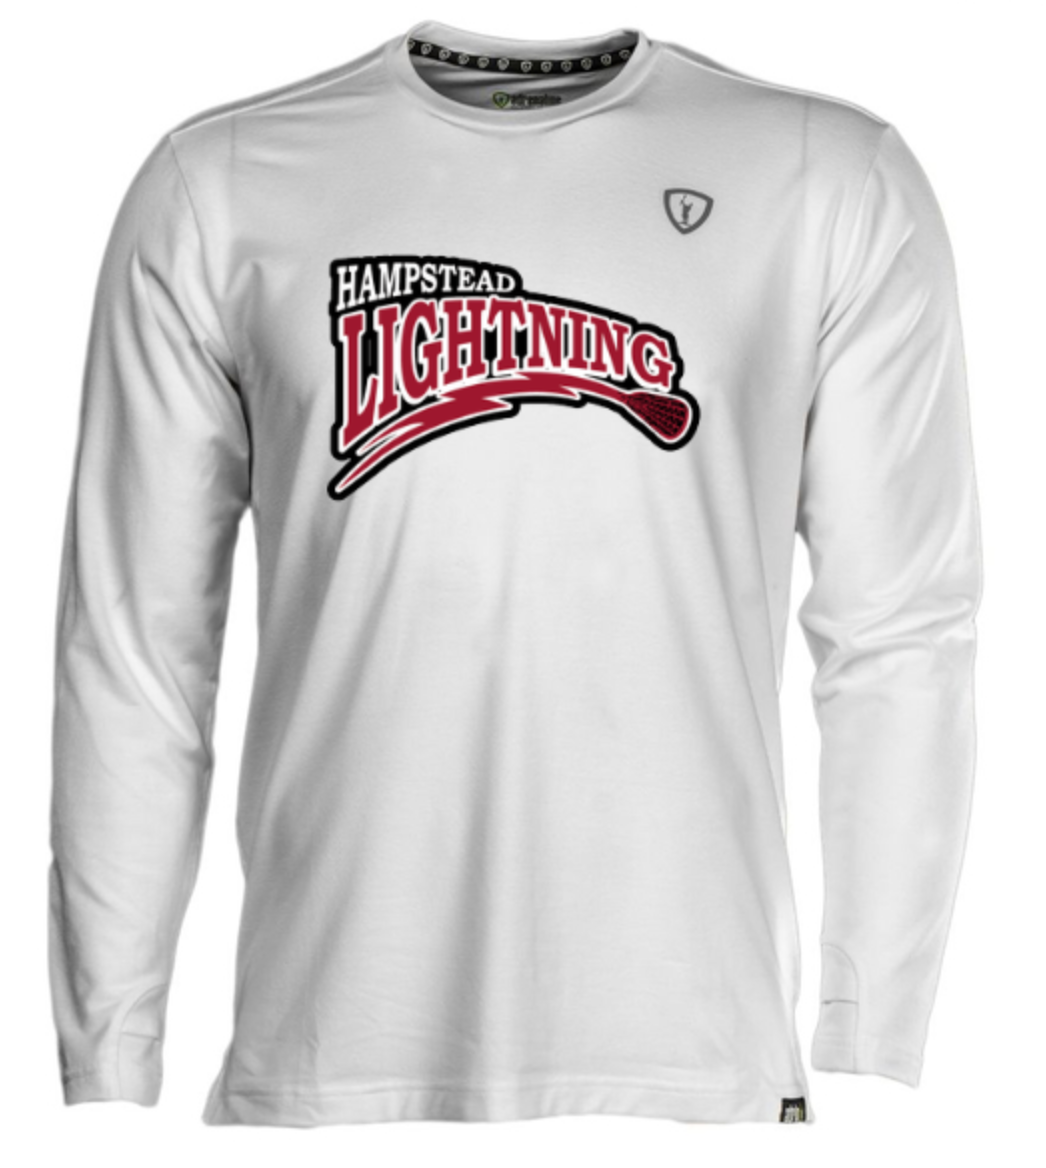 ADRENALINE LACROSSE ANYTIME PERFORMANCE Adult / Youth LS TEE SHIRT